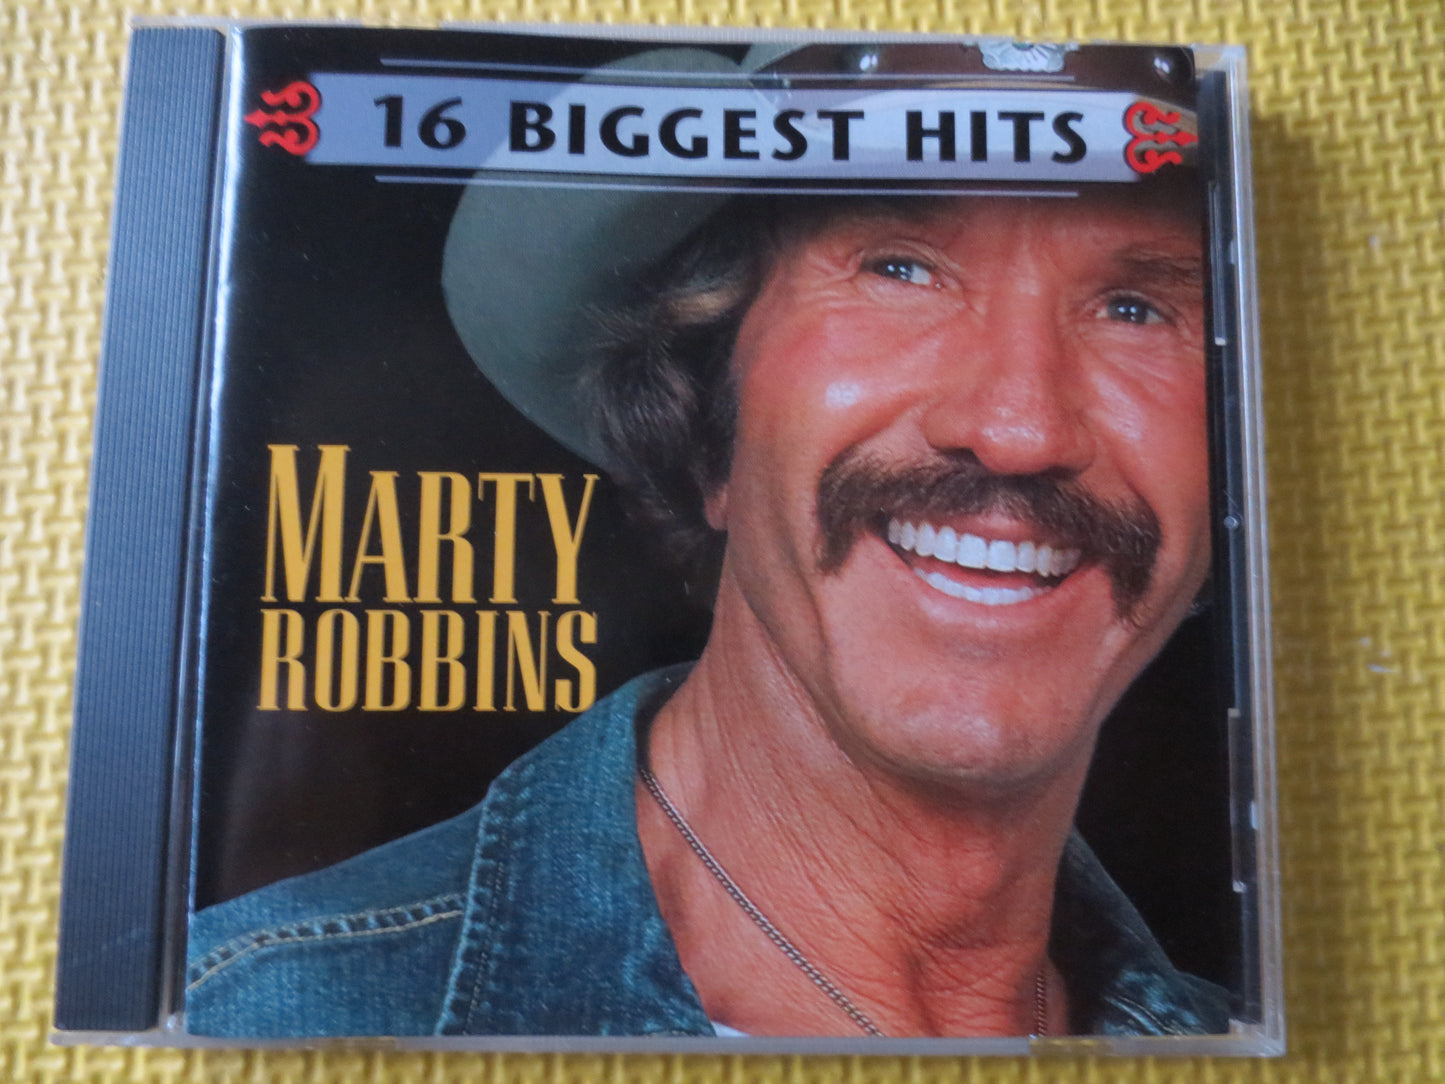 MARTY ROBBINS, 16 BIGGEST Hits, Marty Robbins Album, Country Cd, Classic Country Cd, Music Cd, Cd Music, Cds, 1998 Compact Disc